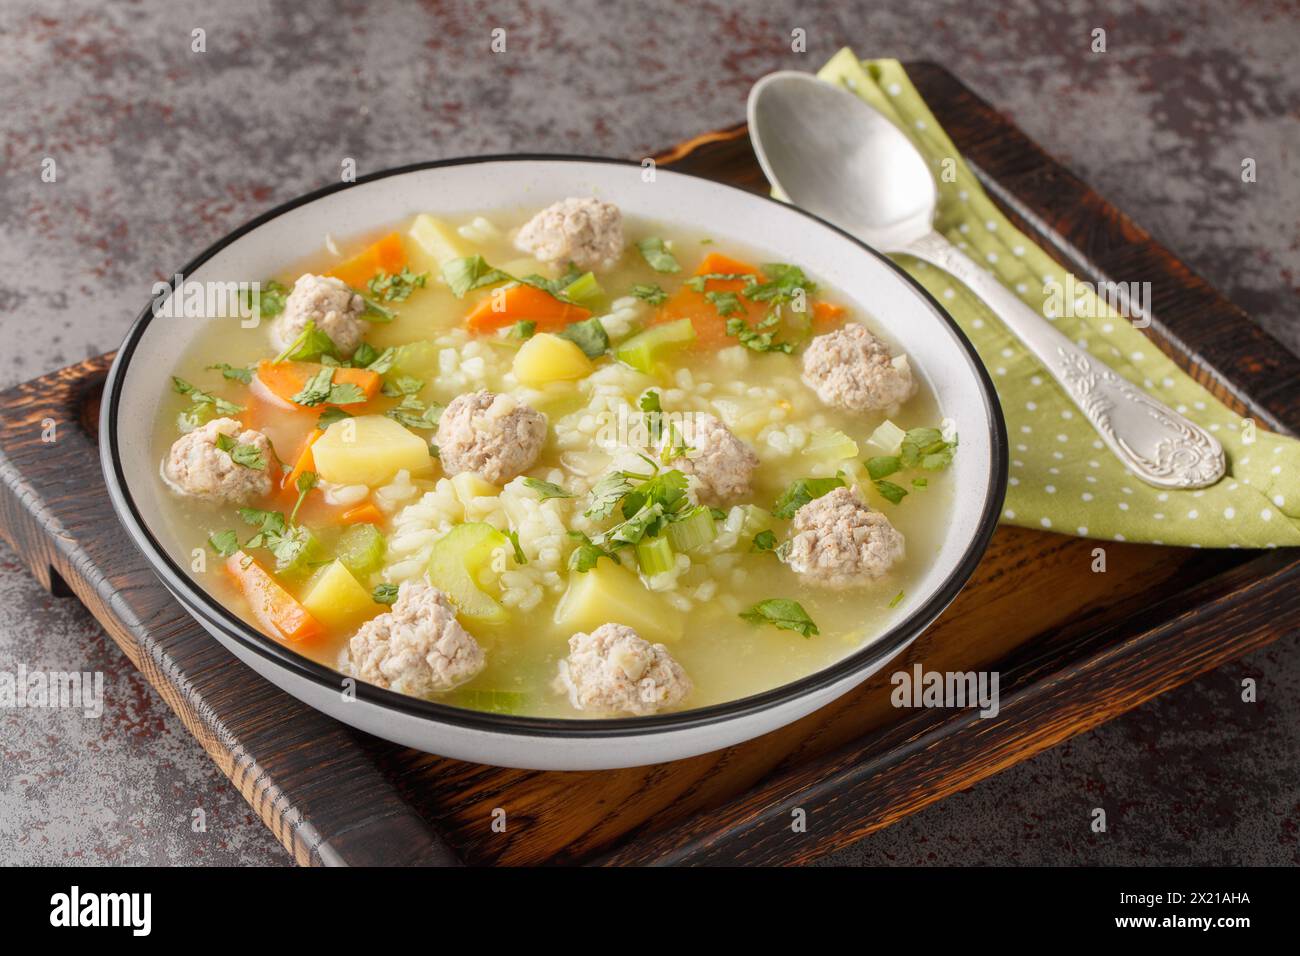 Dietary Rice meatball soup with celery, carrots, onions, potatoes and herbs close-up in a bowl on the table. Horizontal Stock Photo